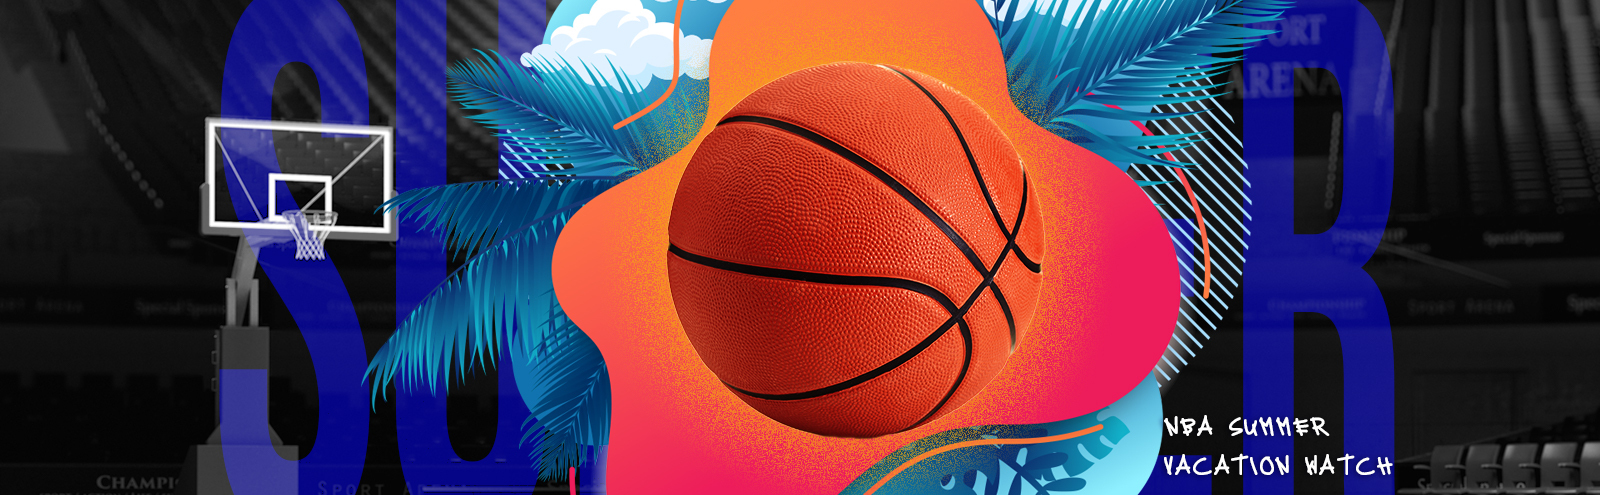 NBA Summer Vacation Watch: Summer Is Back, Summer Is Forever